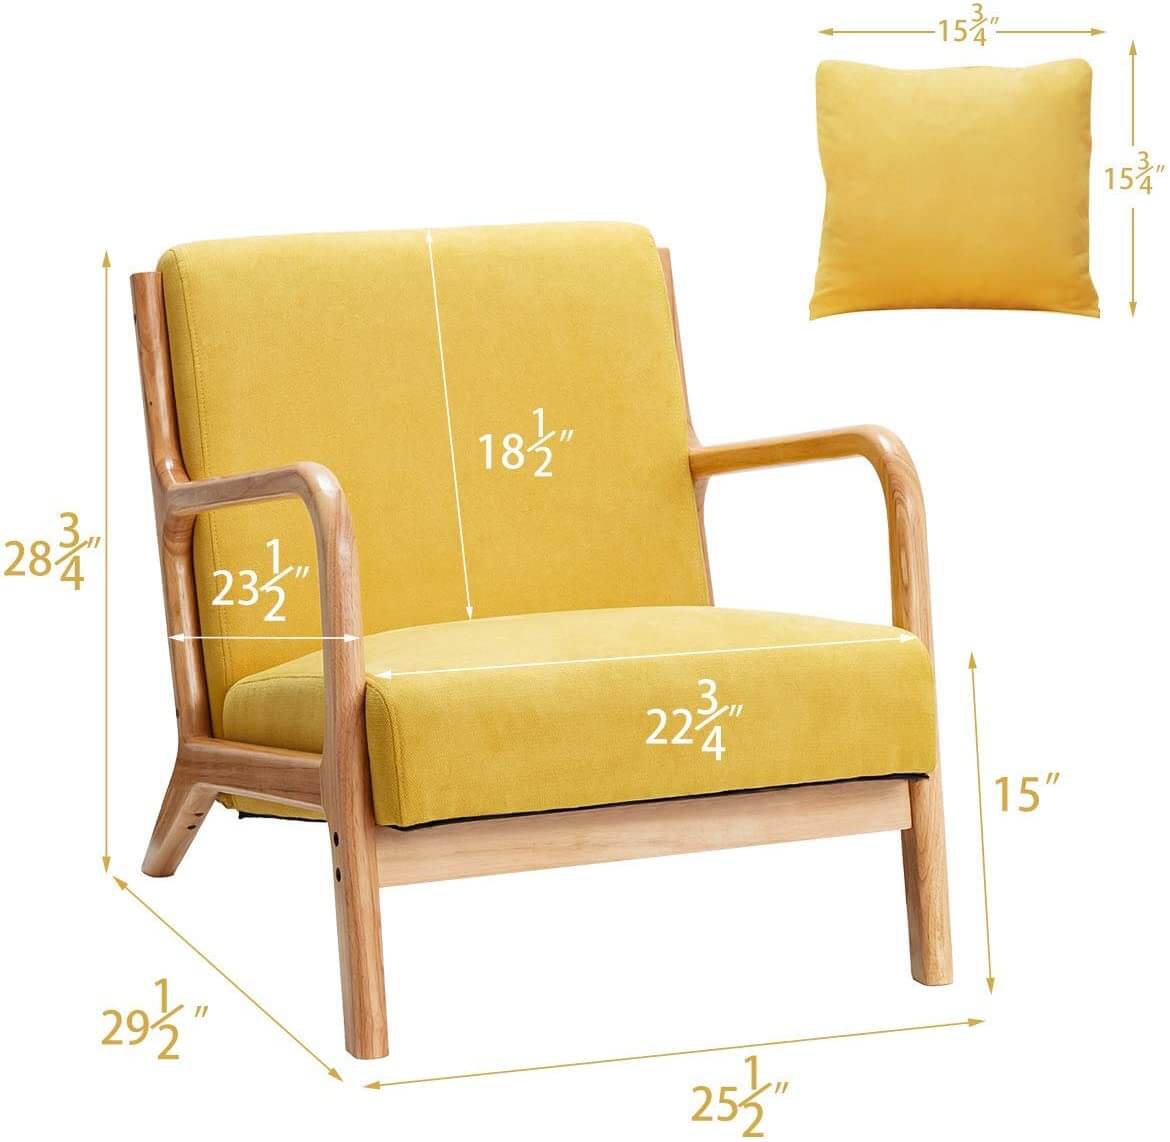 Lounge Arm Chair Mid Century Modern Accent Chair Wood Frame Armchair, Yellow